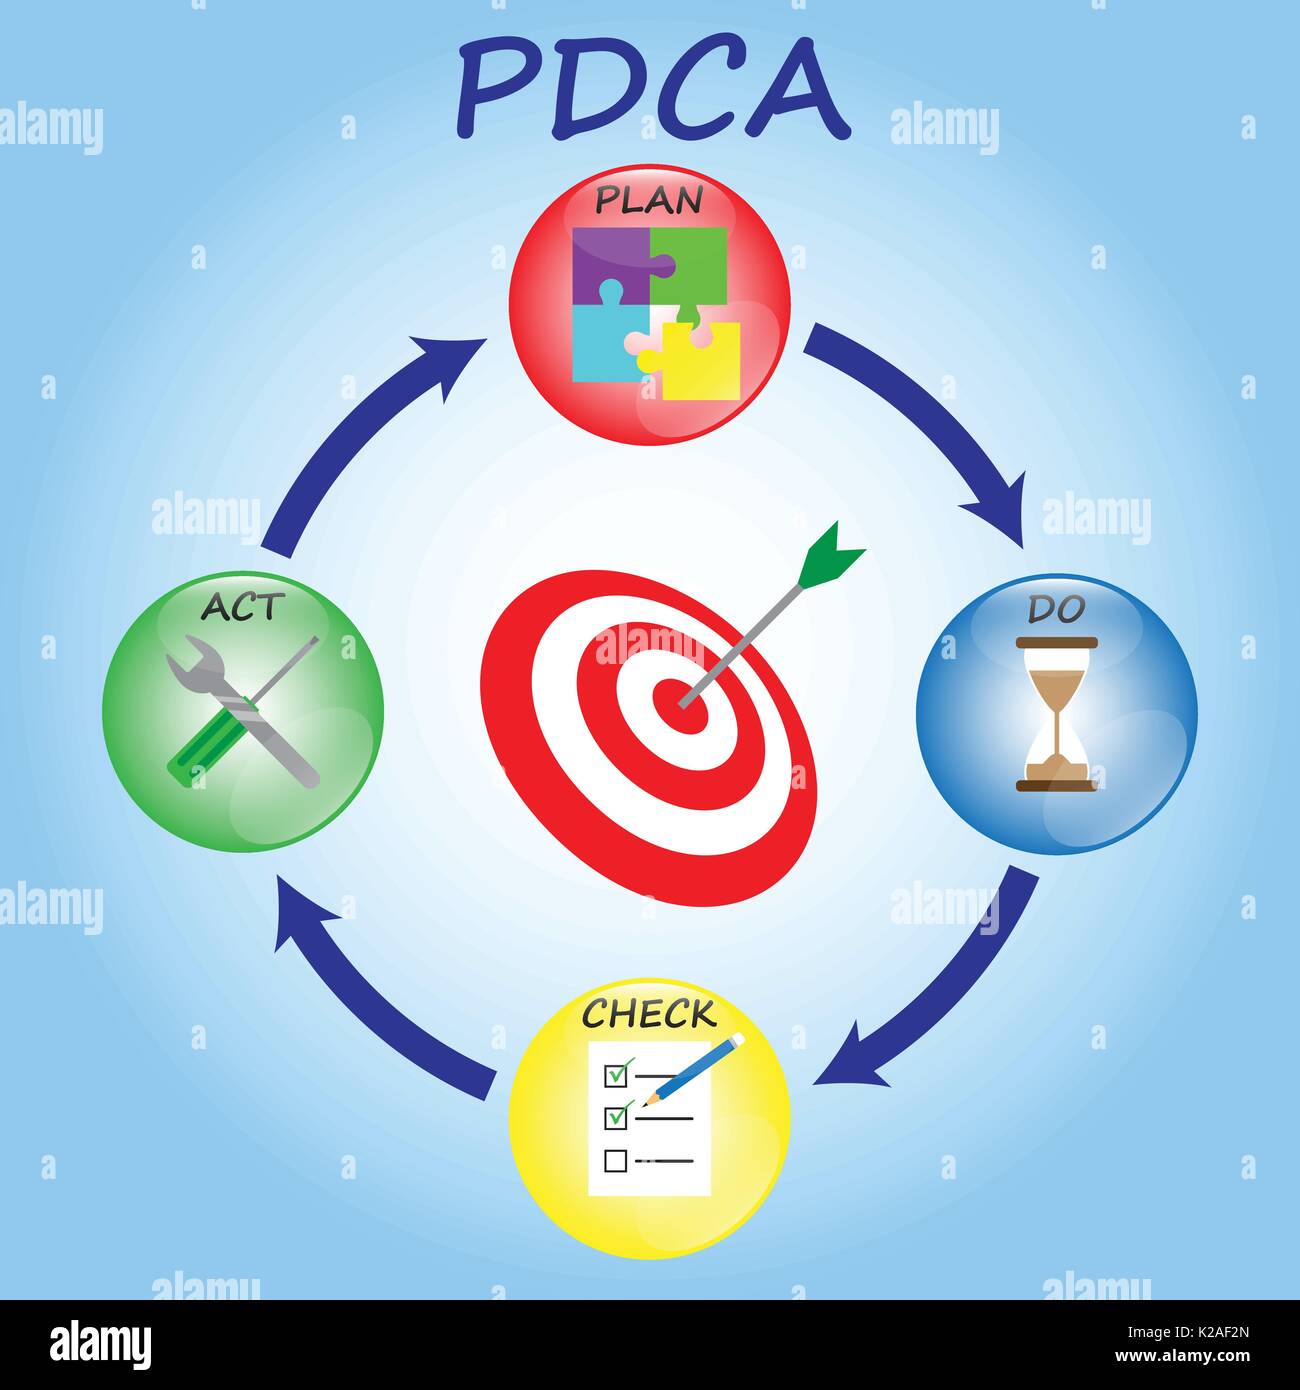 PDCA Diagram As Crystal Balls With Icons Inside: Jigsaw, Sandglass, Checklist With Pencil, Wrench & Screwdriver. In The Middle Is Target Bull's Eye. Stock Vector